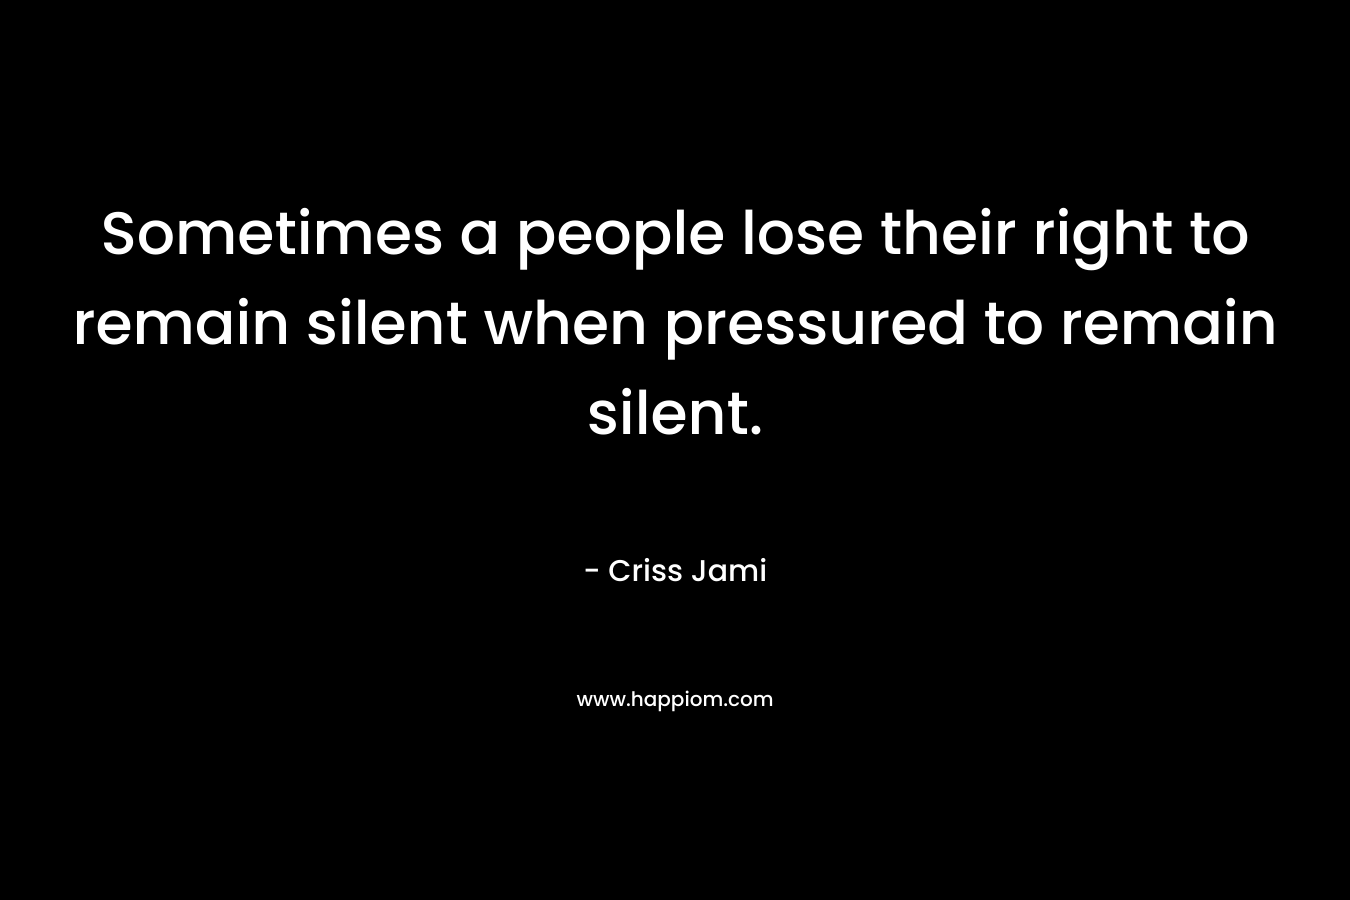 Sometimes a people lose their right to remain silent when pressured to remain silent.